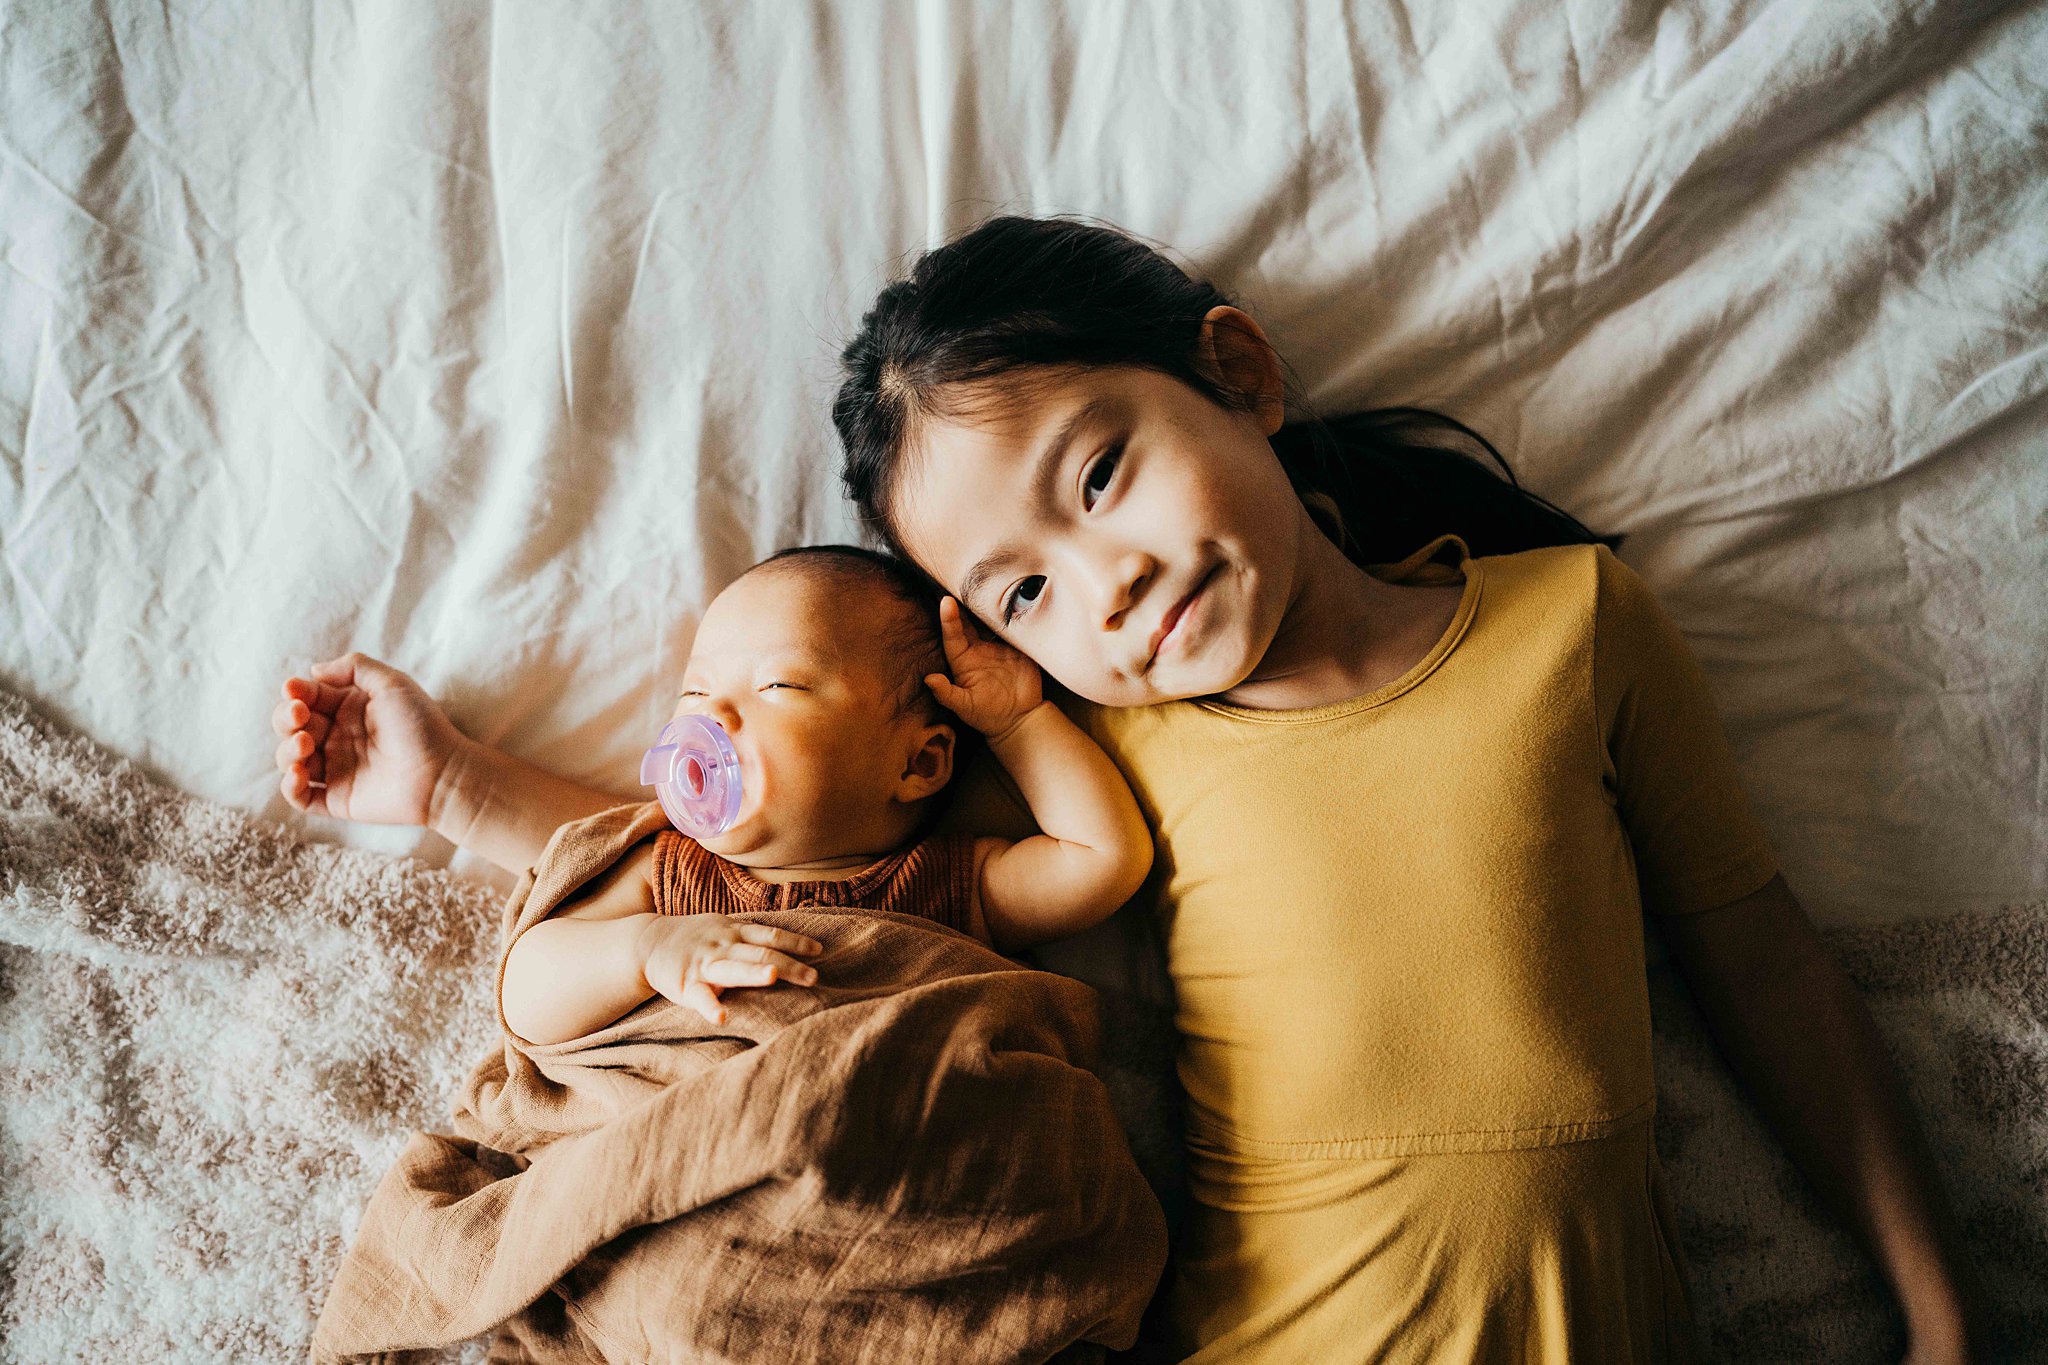 A young girl in a yellow dress lays on a bed with her newborn baby sibling seattle midwives